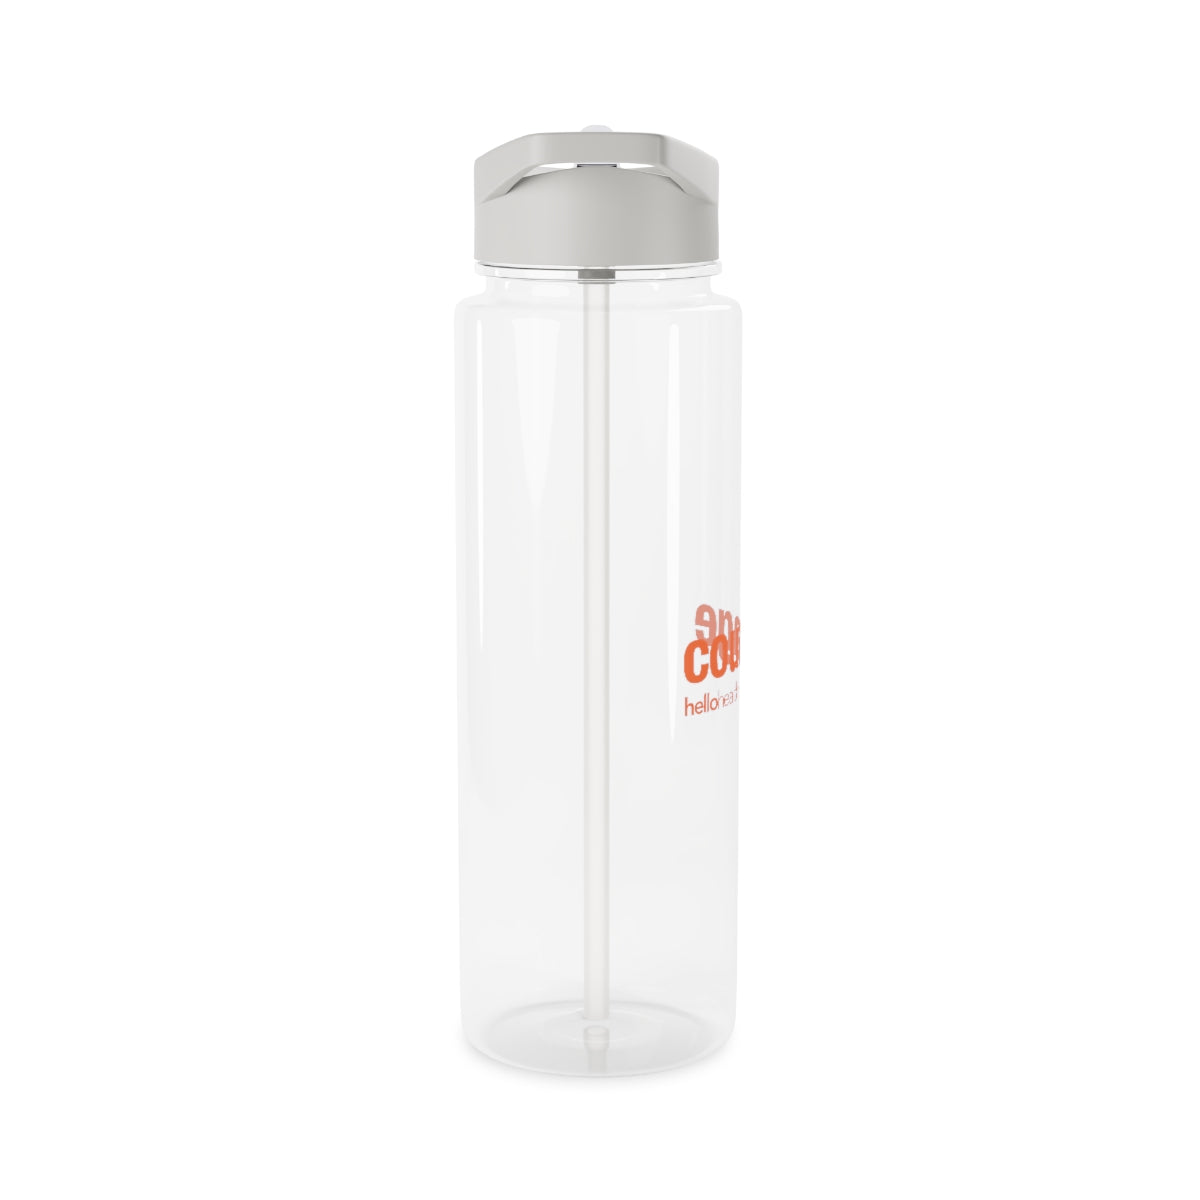 courage Water Bottle